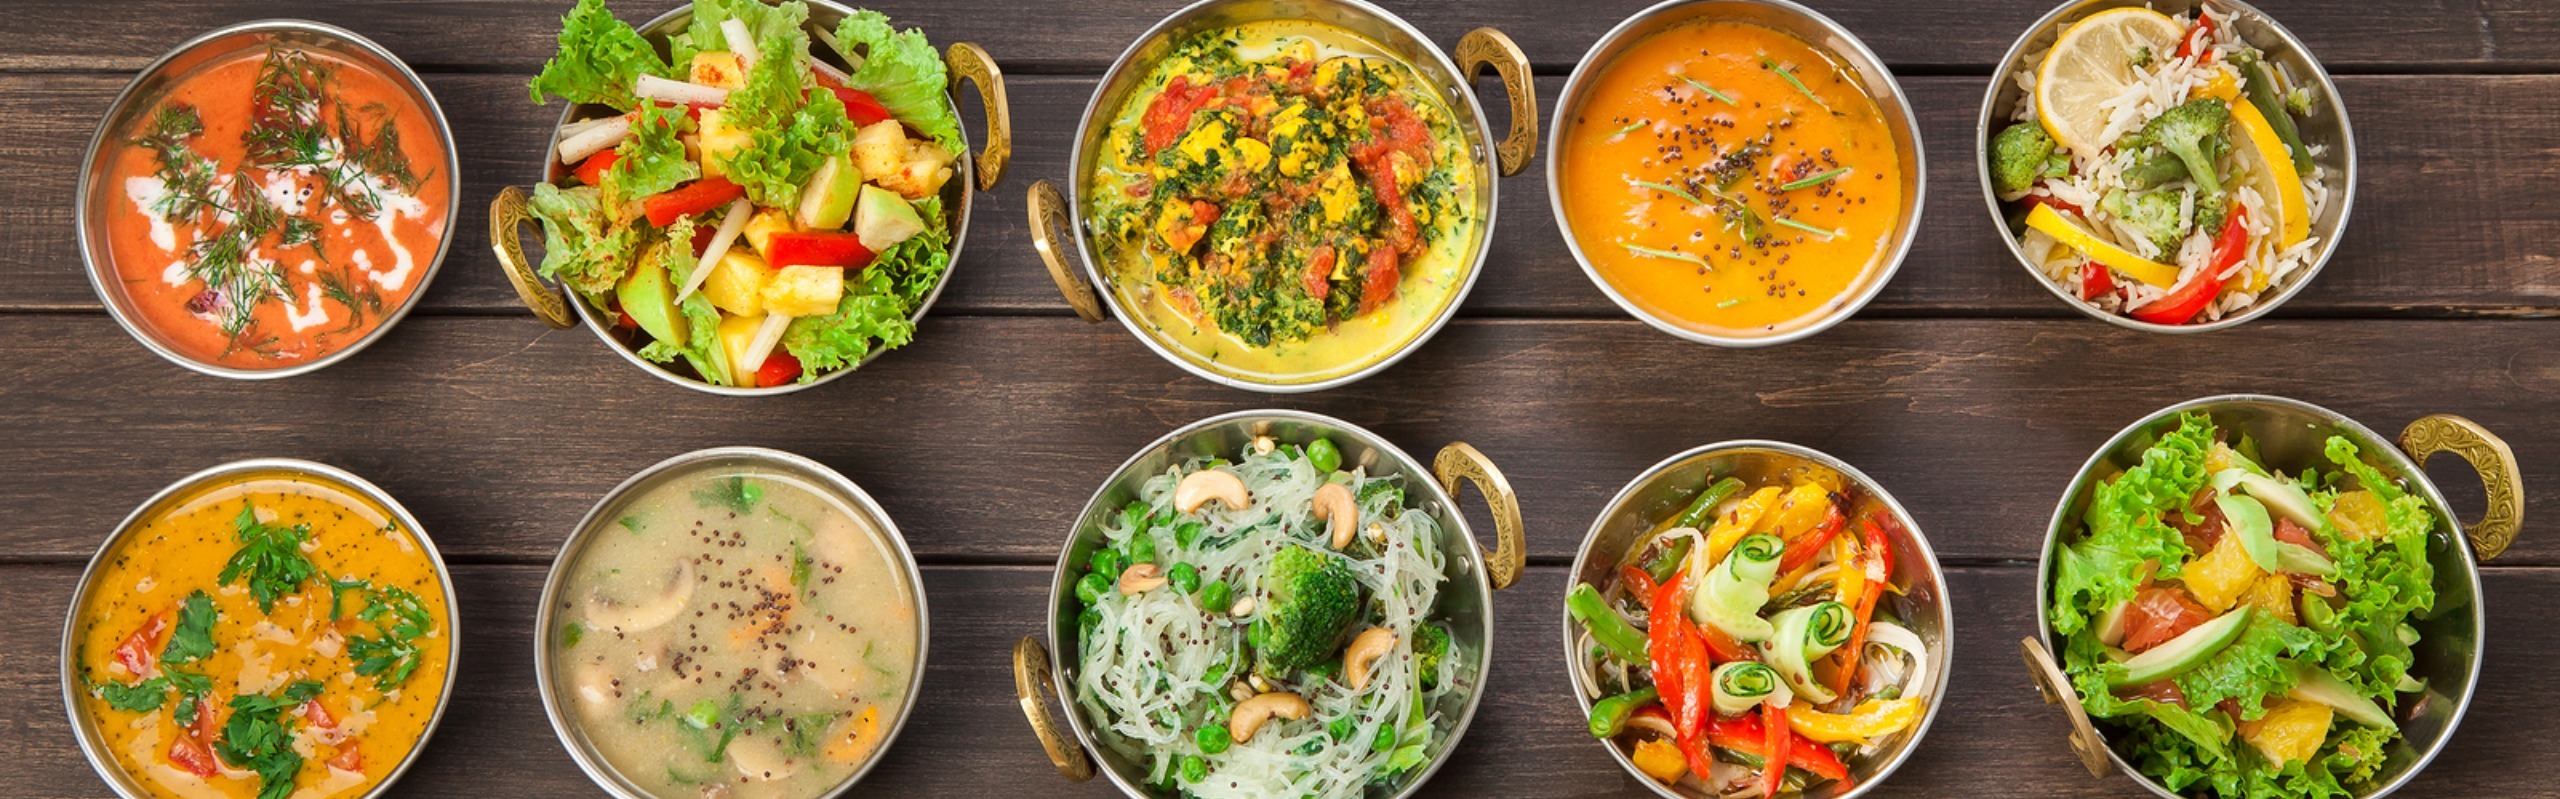 Ayurvedic Diet - How to Eat for Your Body Type